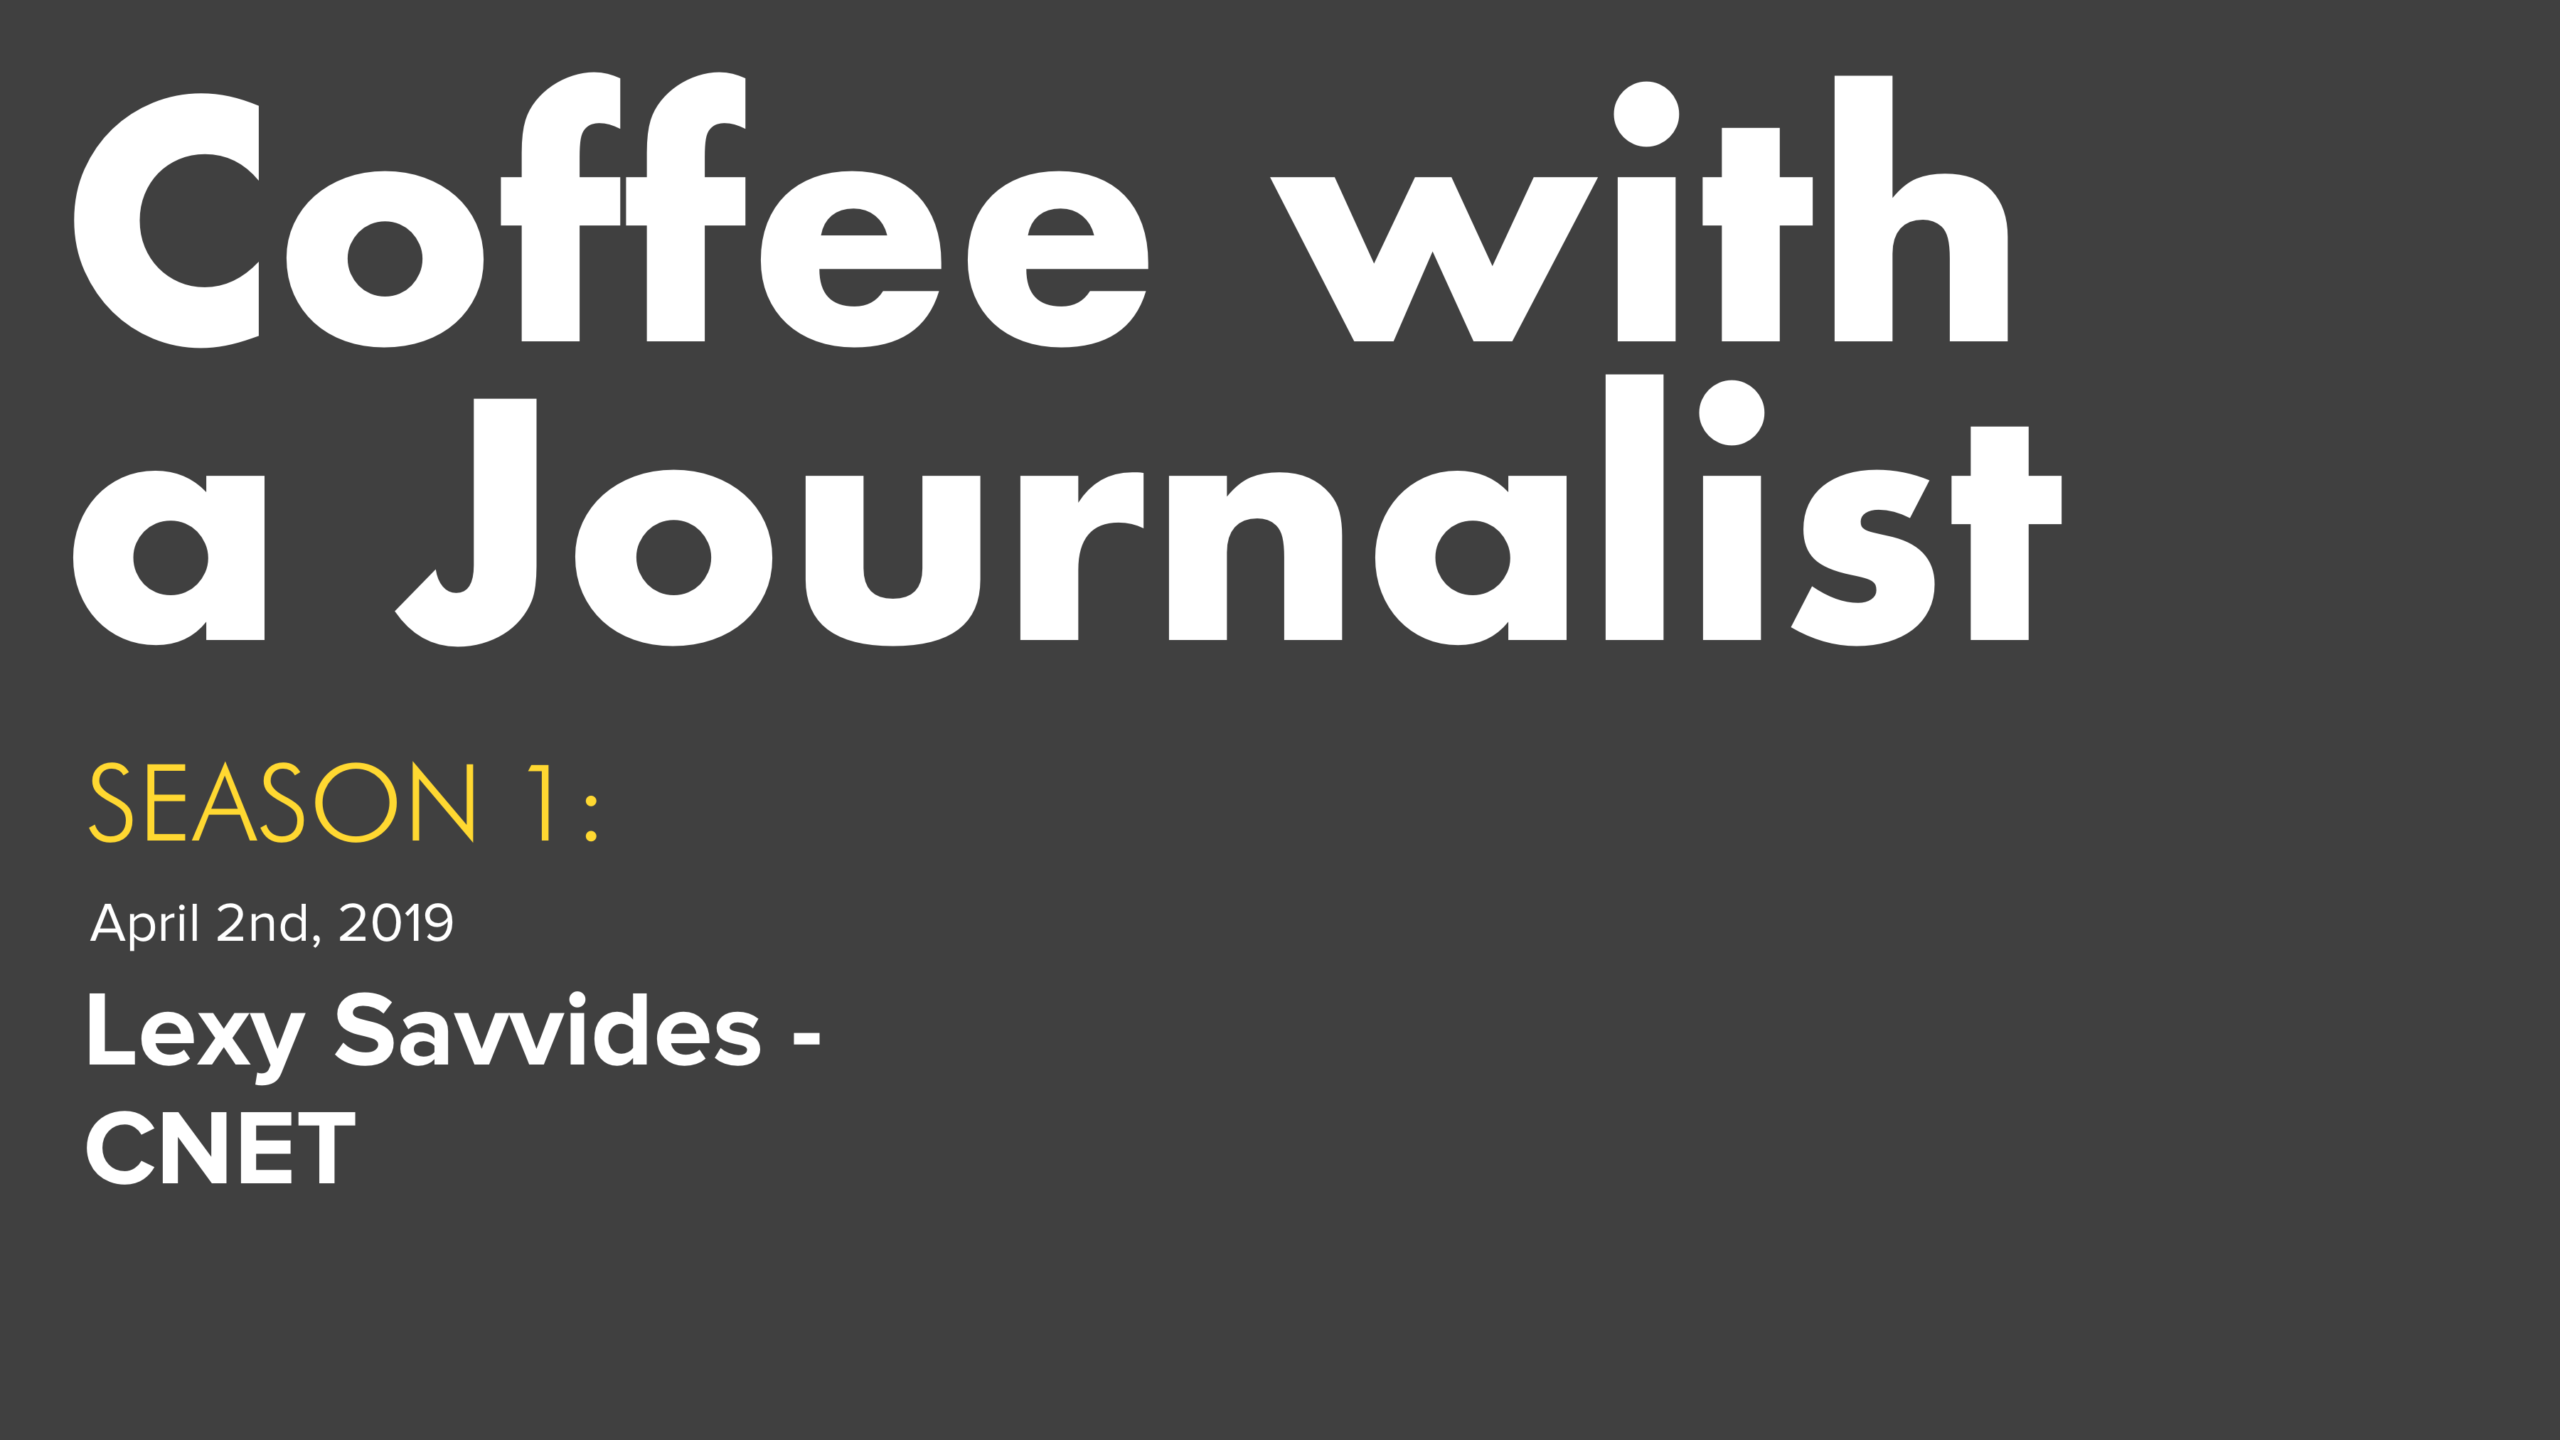 Coffee with a Journalist: Lexy Savvides, CNET